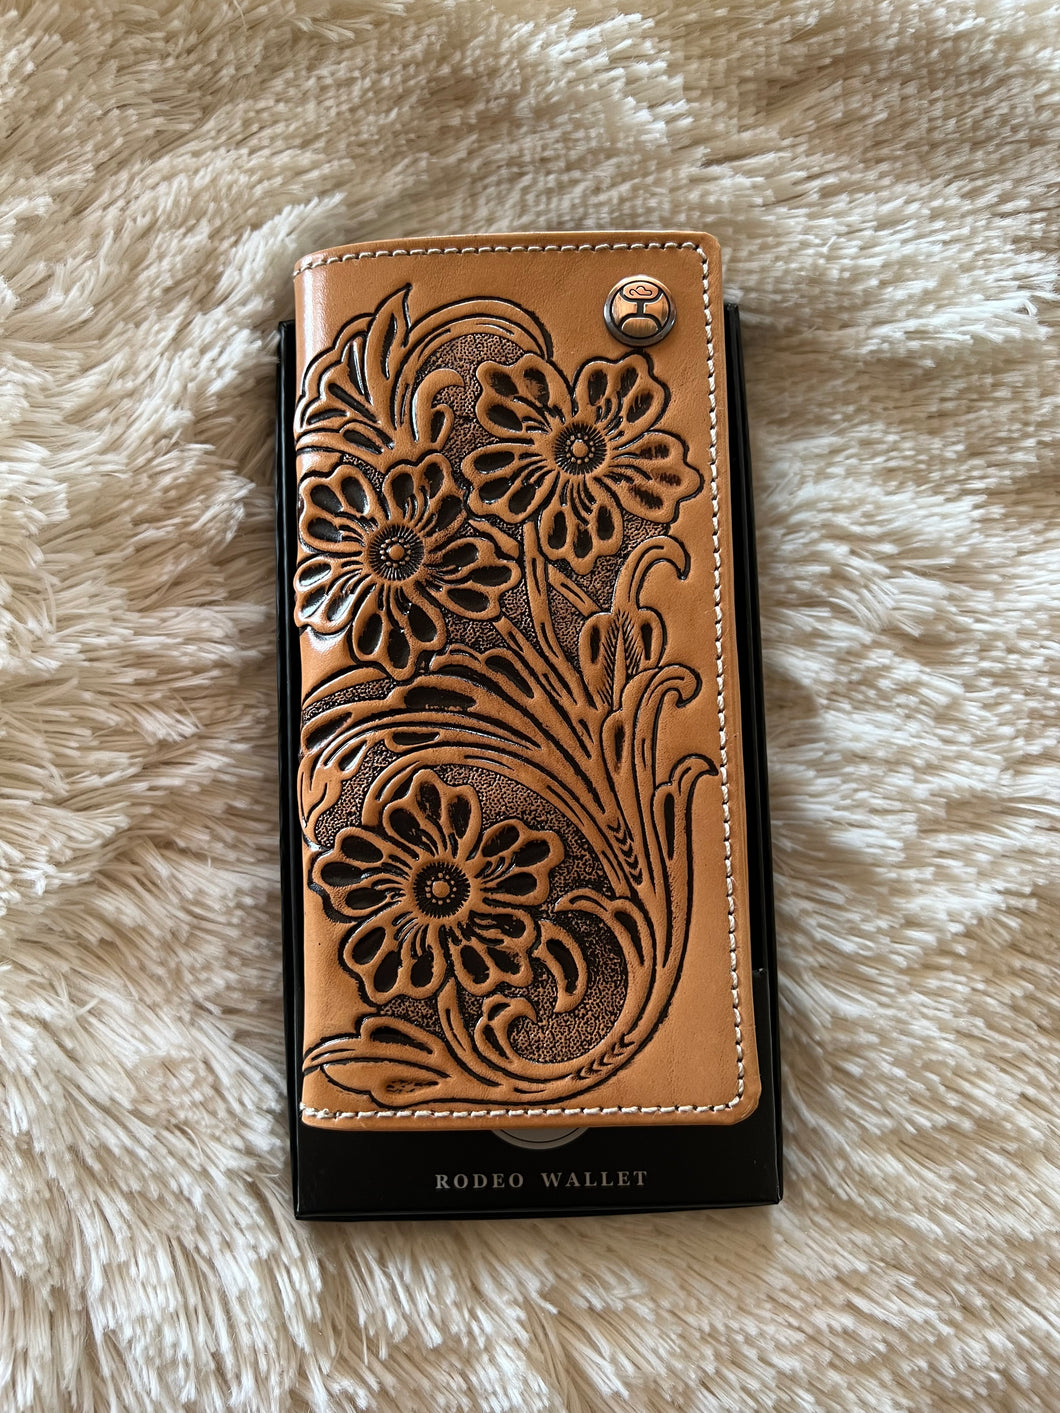 All Over Hand-Tooled Leather Floral Rodeo Wallet